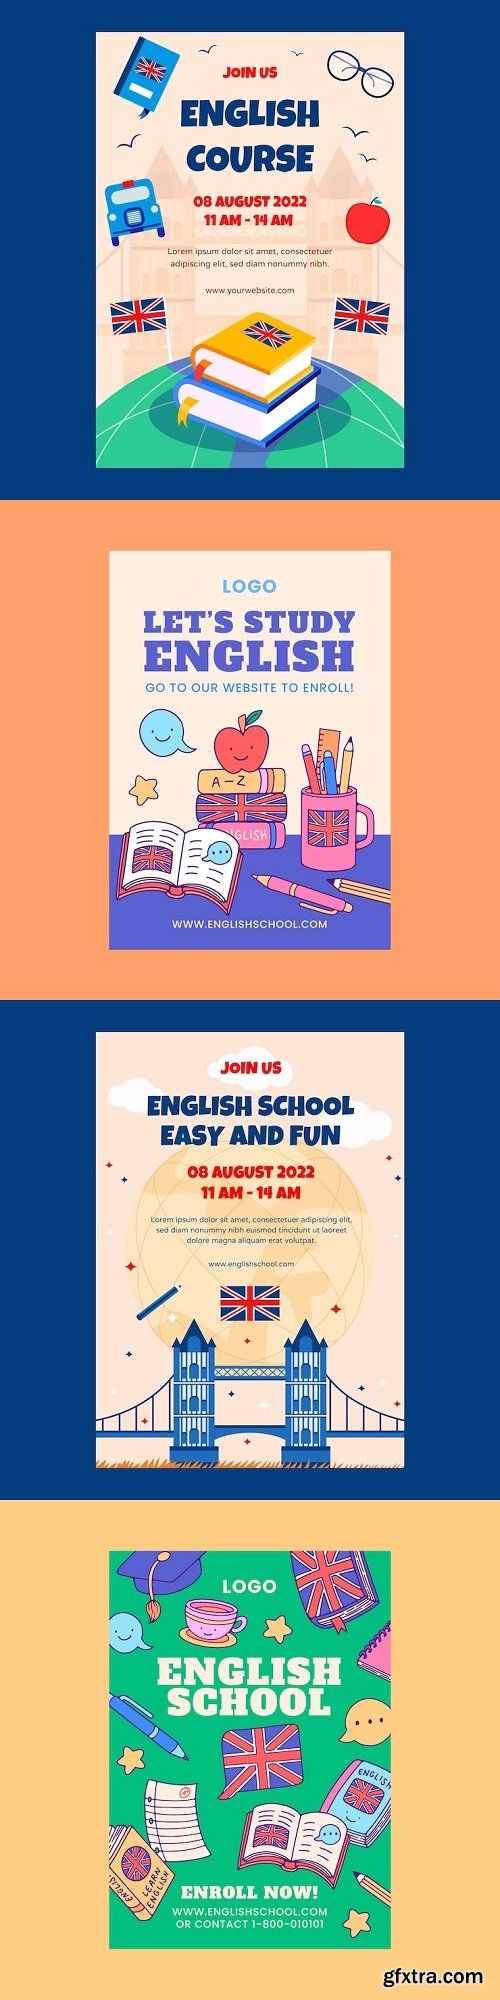 English school poster template